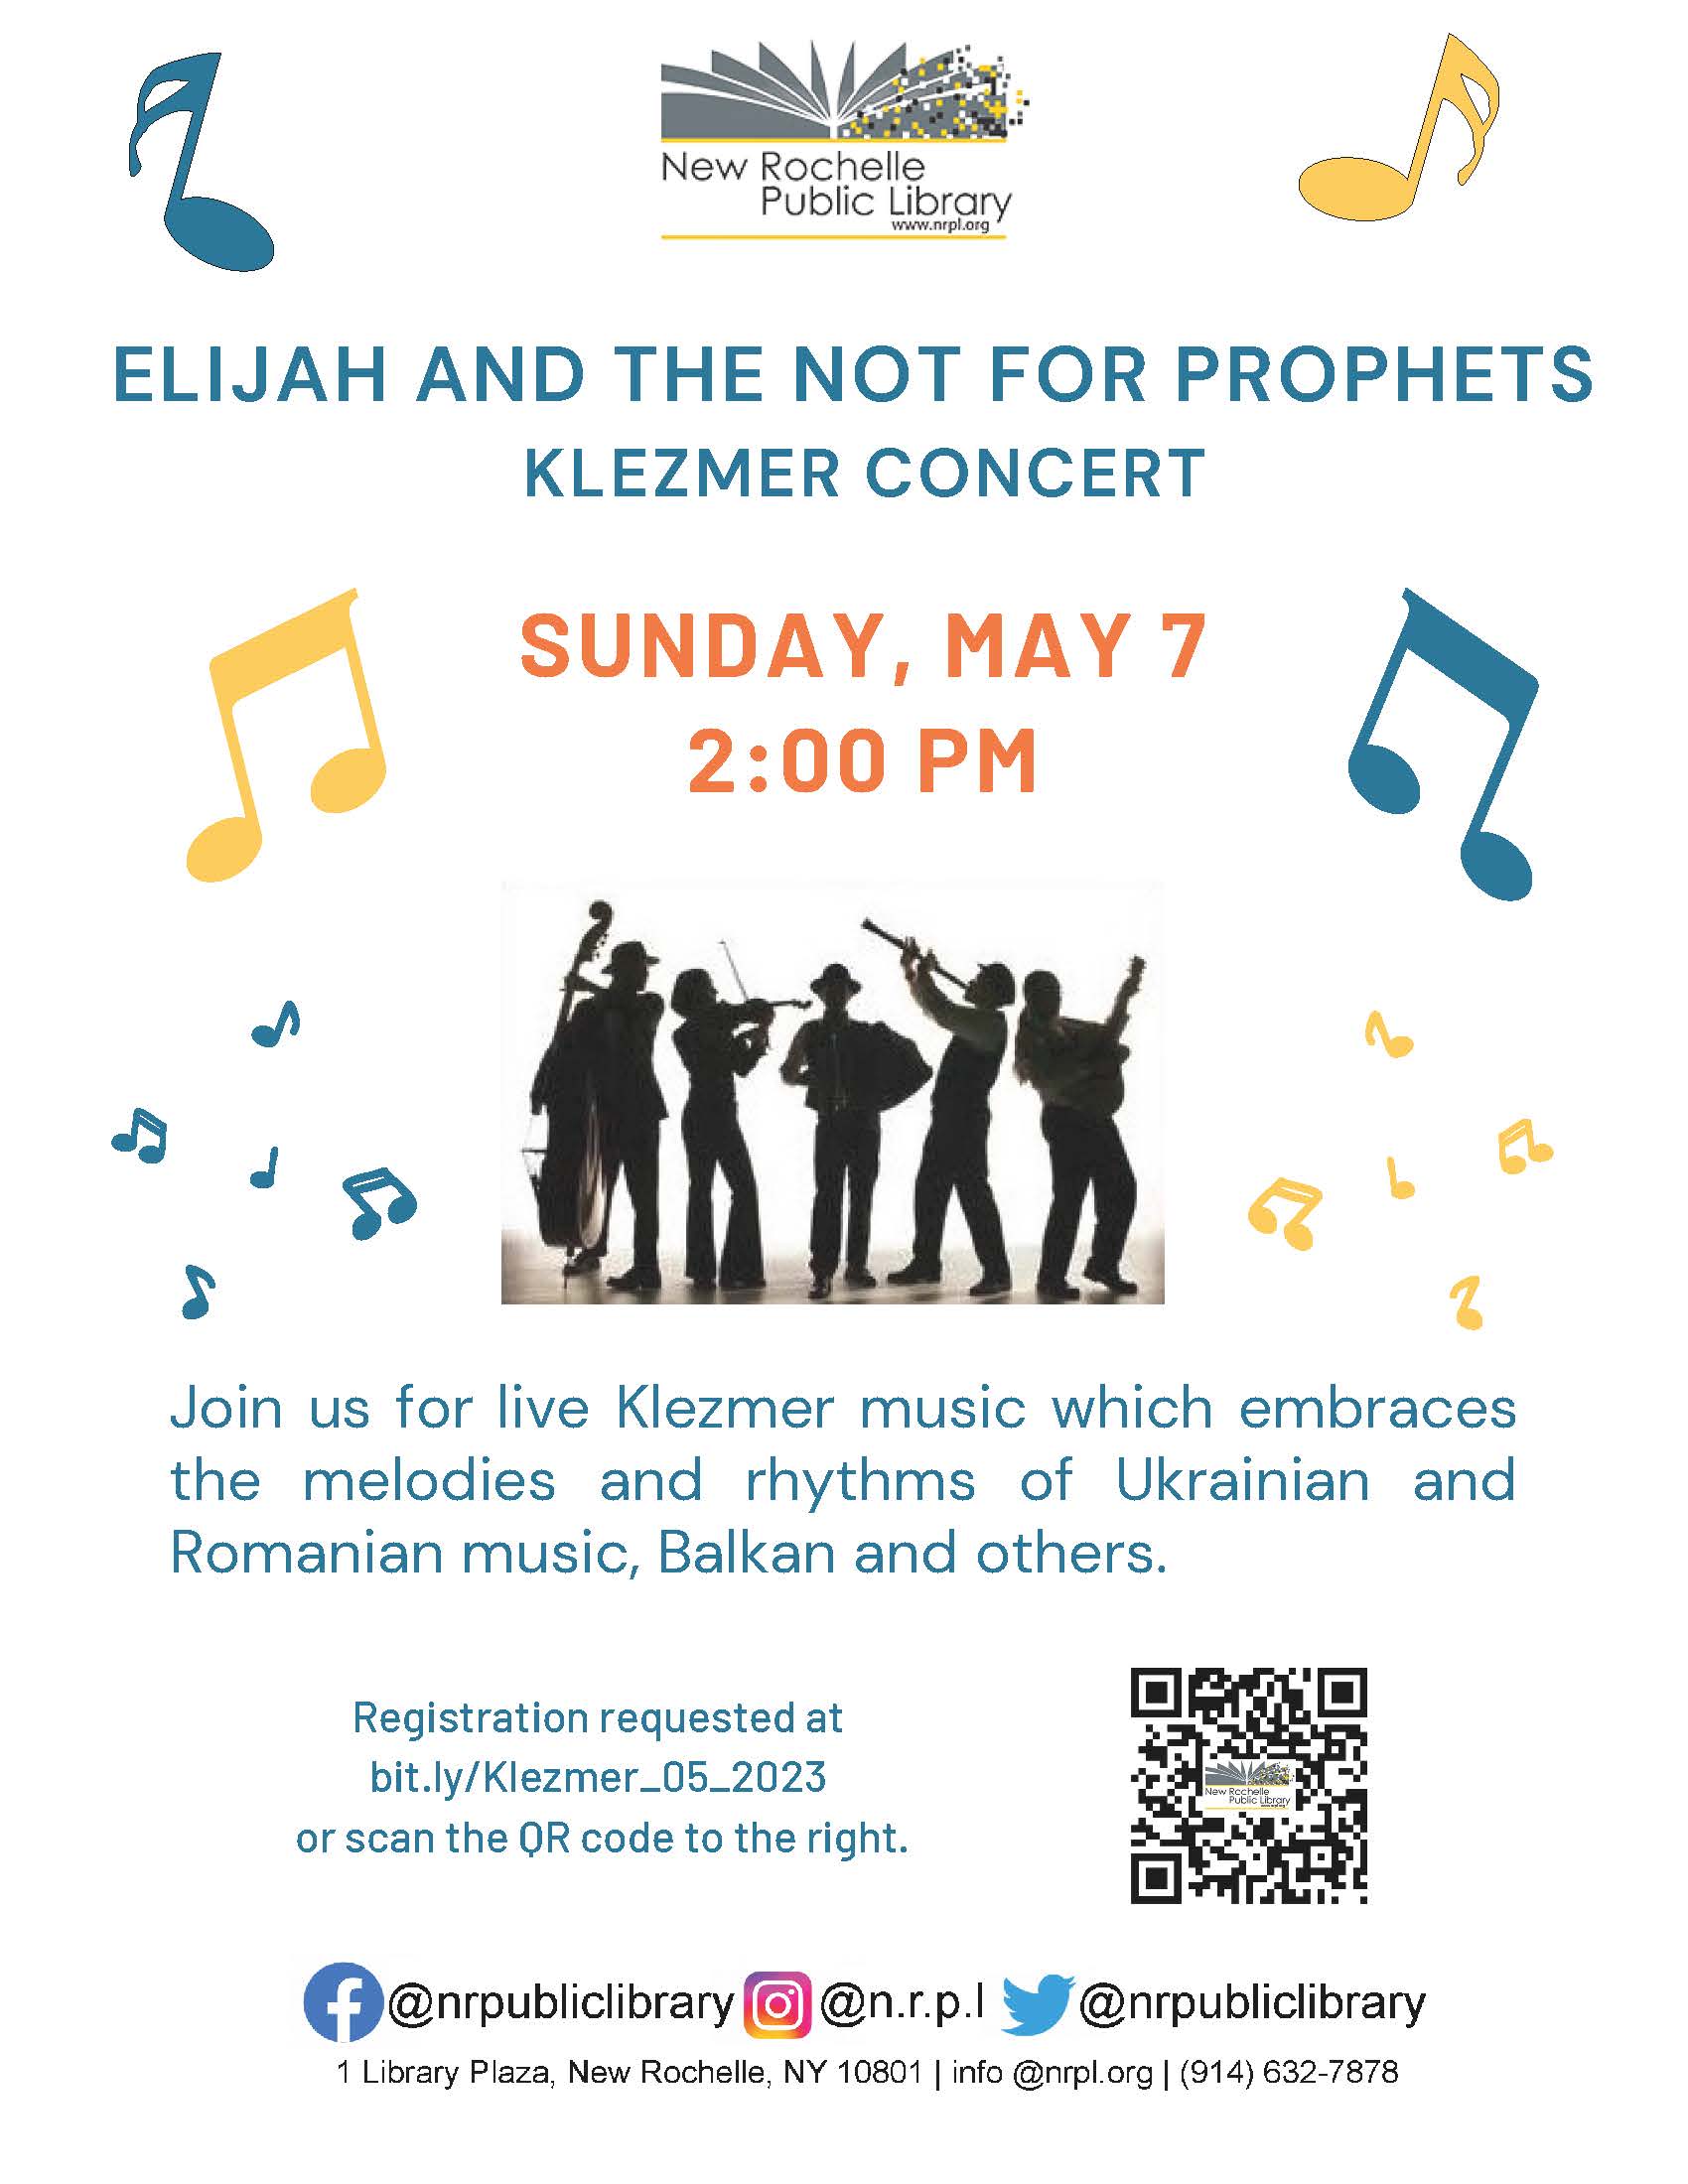 Elijah and the Not for Prophets